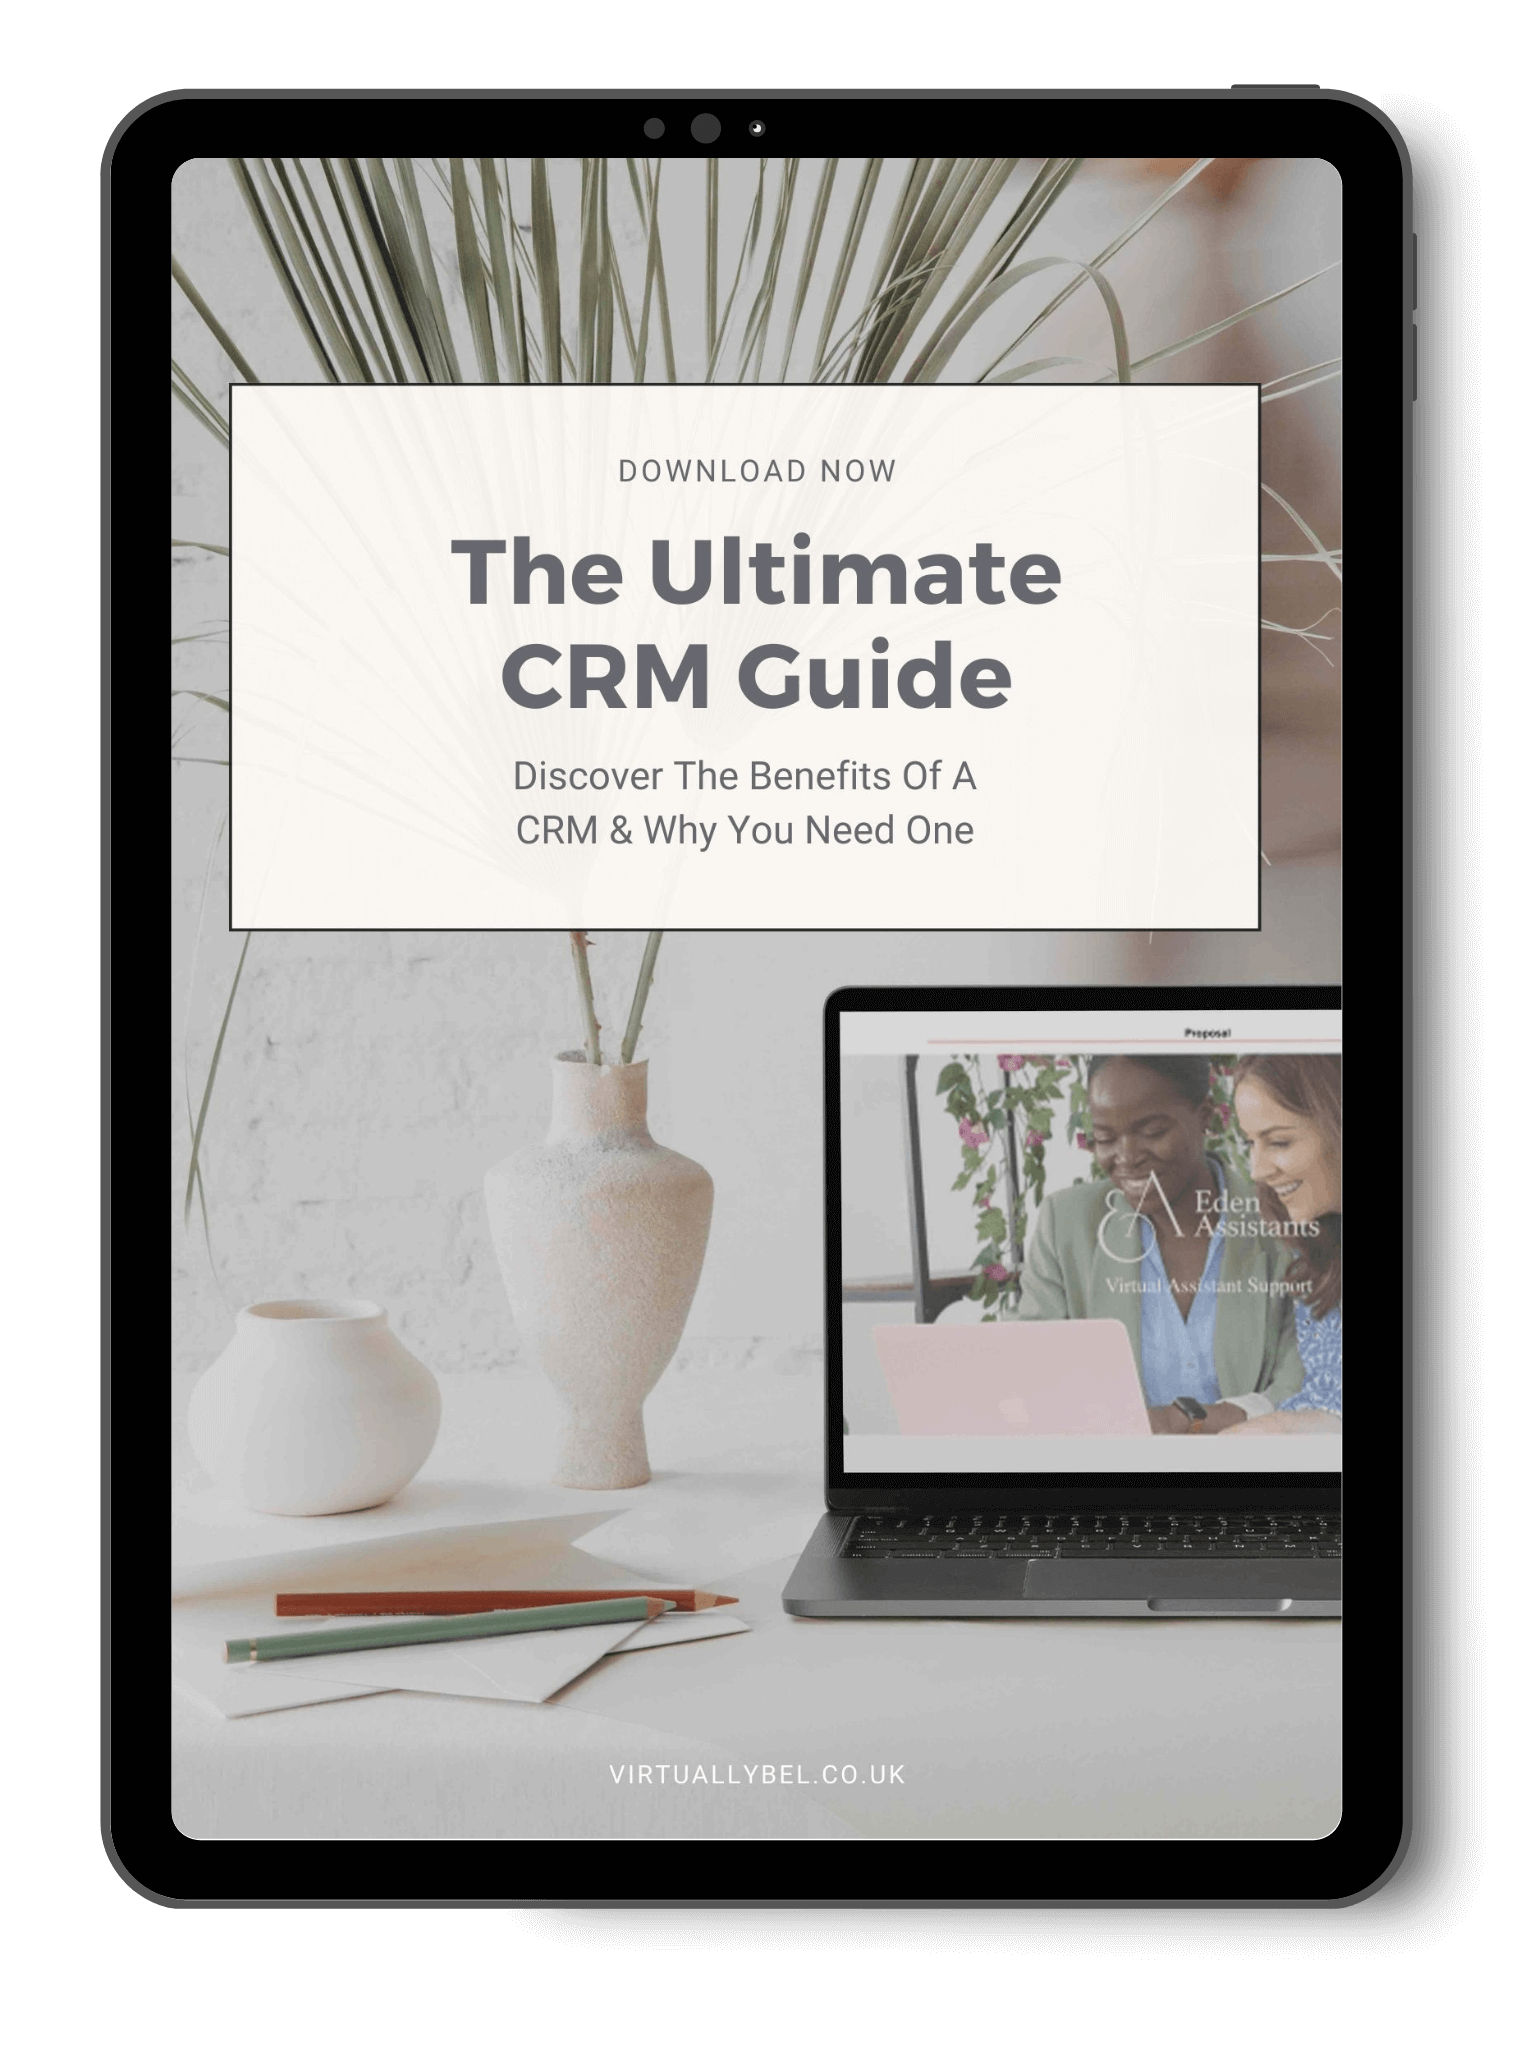 The Ultimate CRM Guide Ipad Mockup